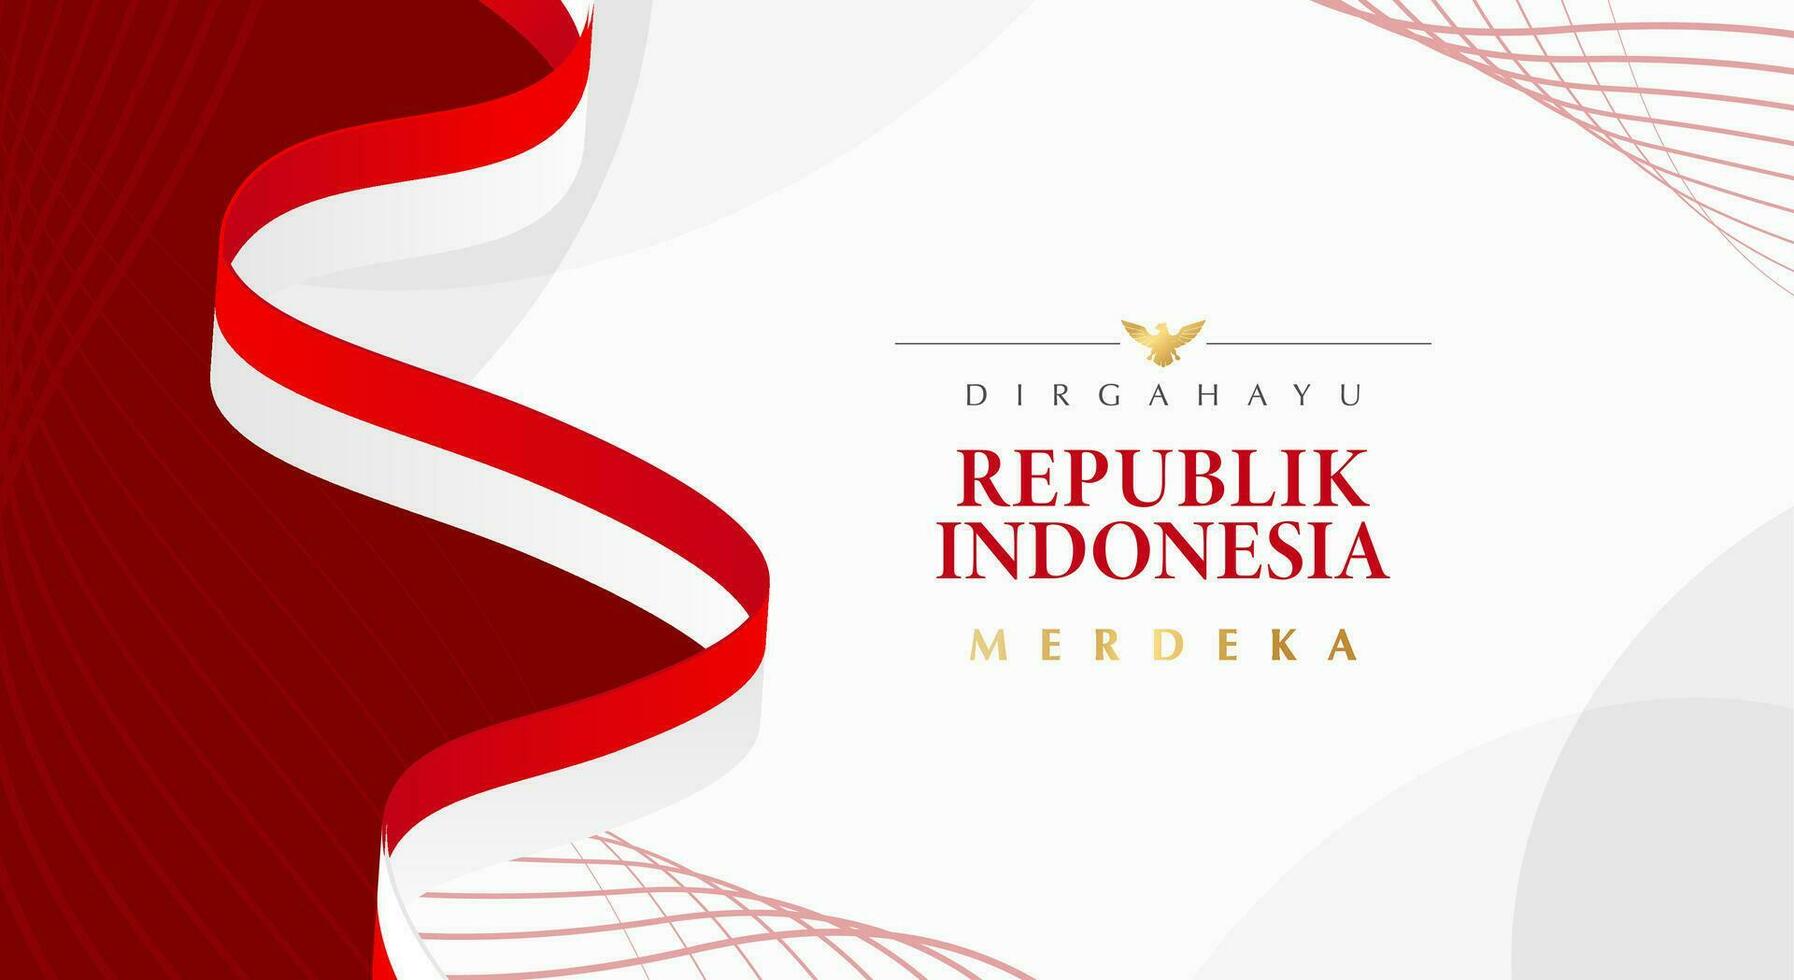 Indonesia independence day illustration template vector